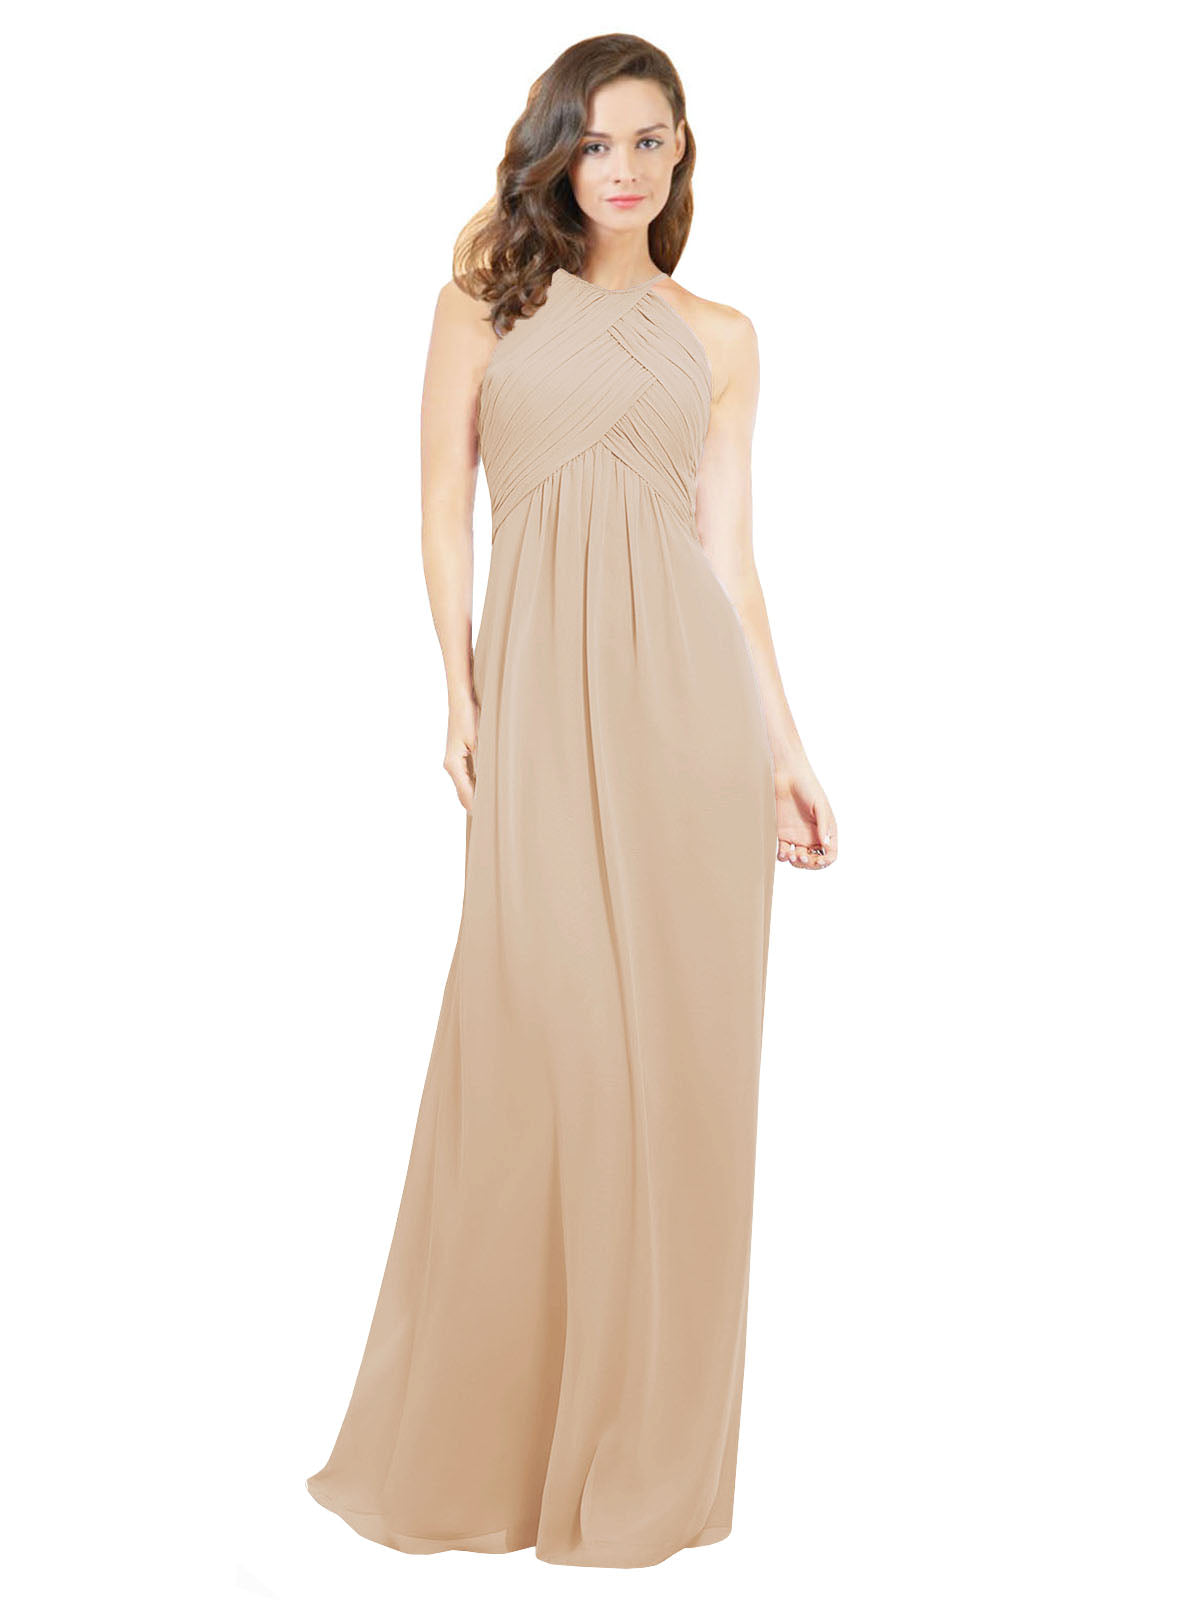 Champagne A-Line Halter Sleeveless Long Bridesmaid Dress Robyn